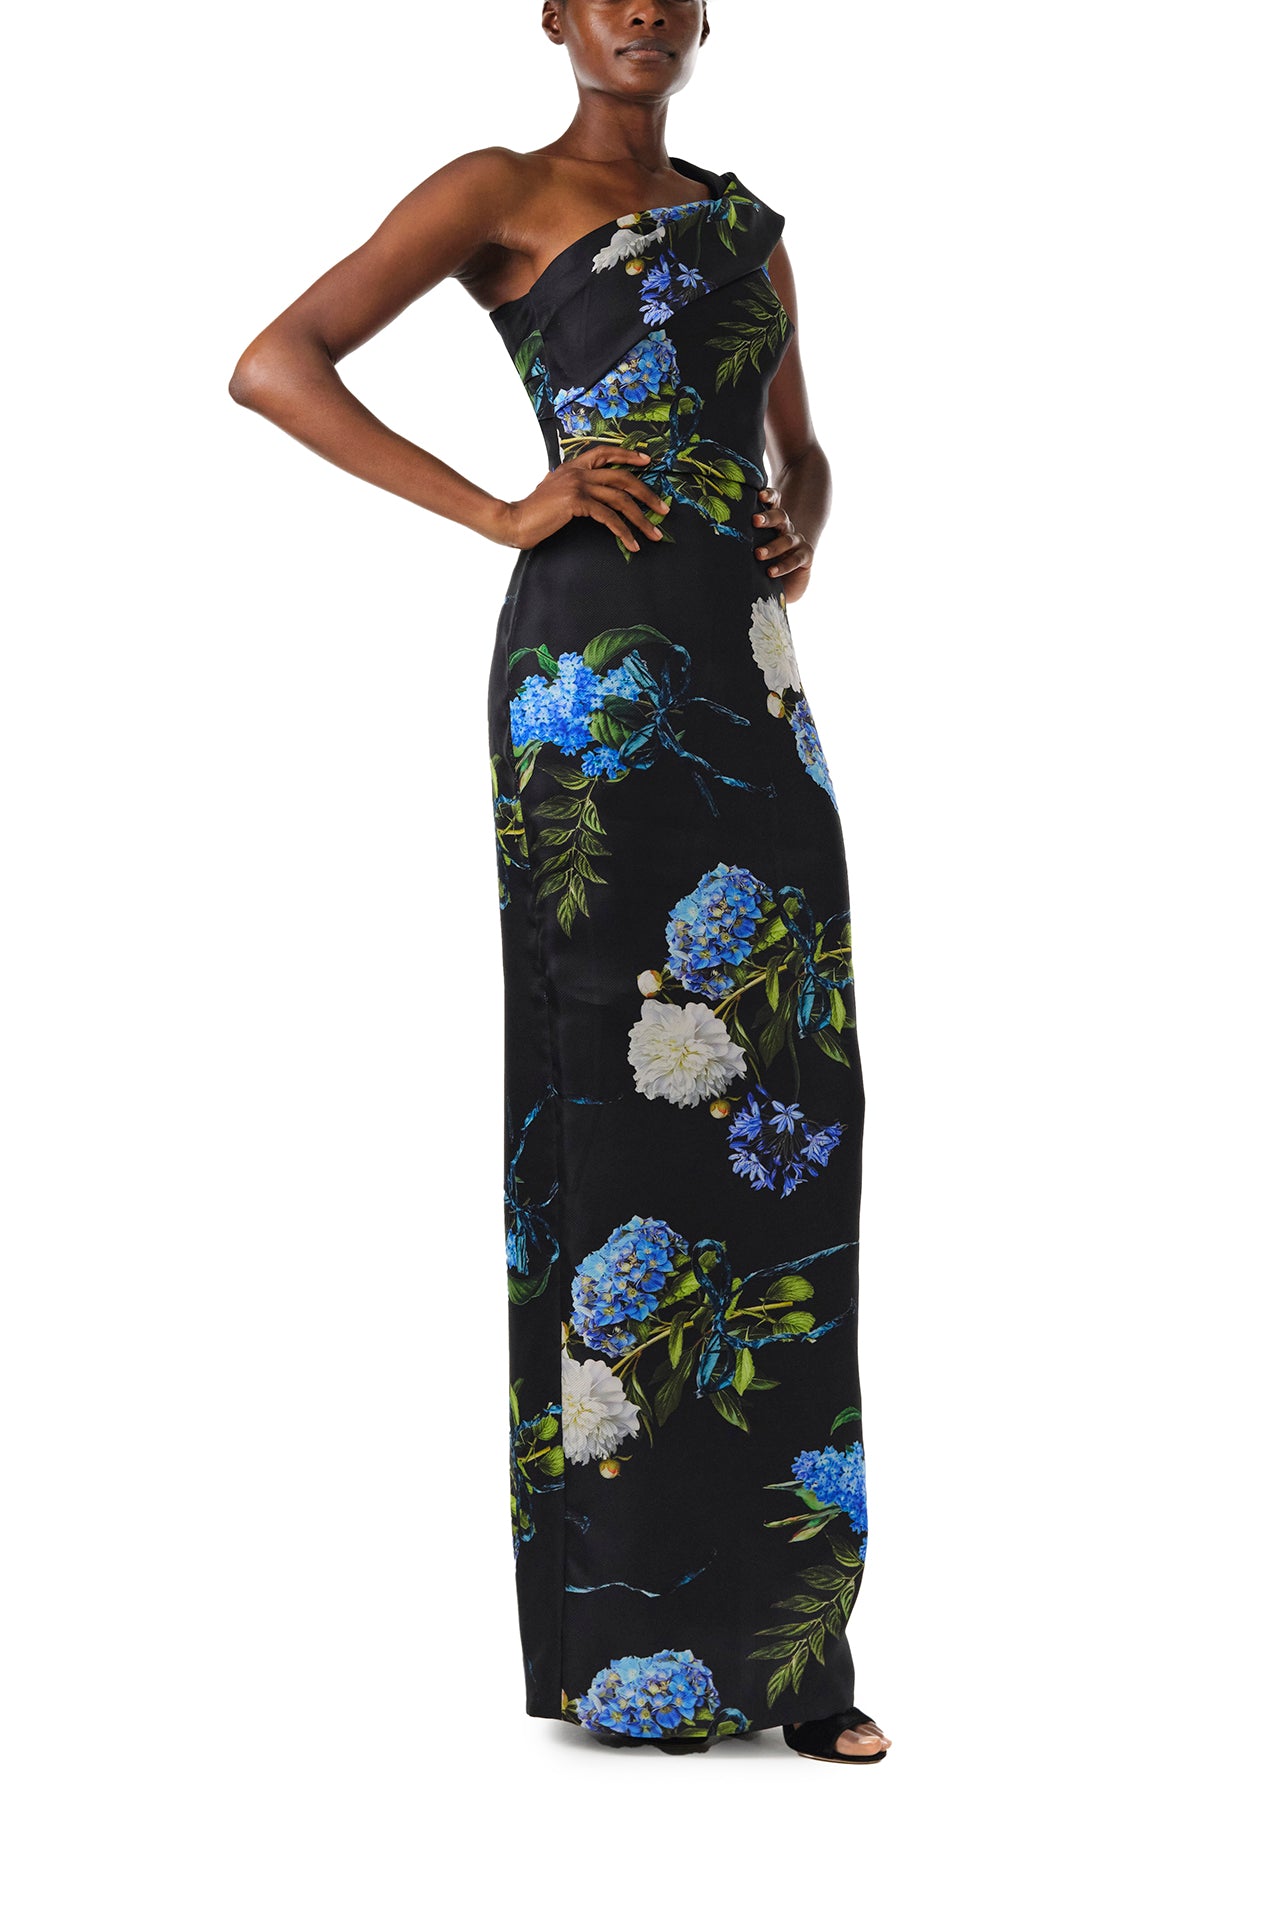 Monique Lhuillier Fall 2024 night sky floral, one shoulder column gown with draped neckline and natural waist seam - right side.